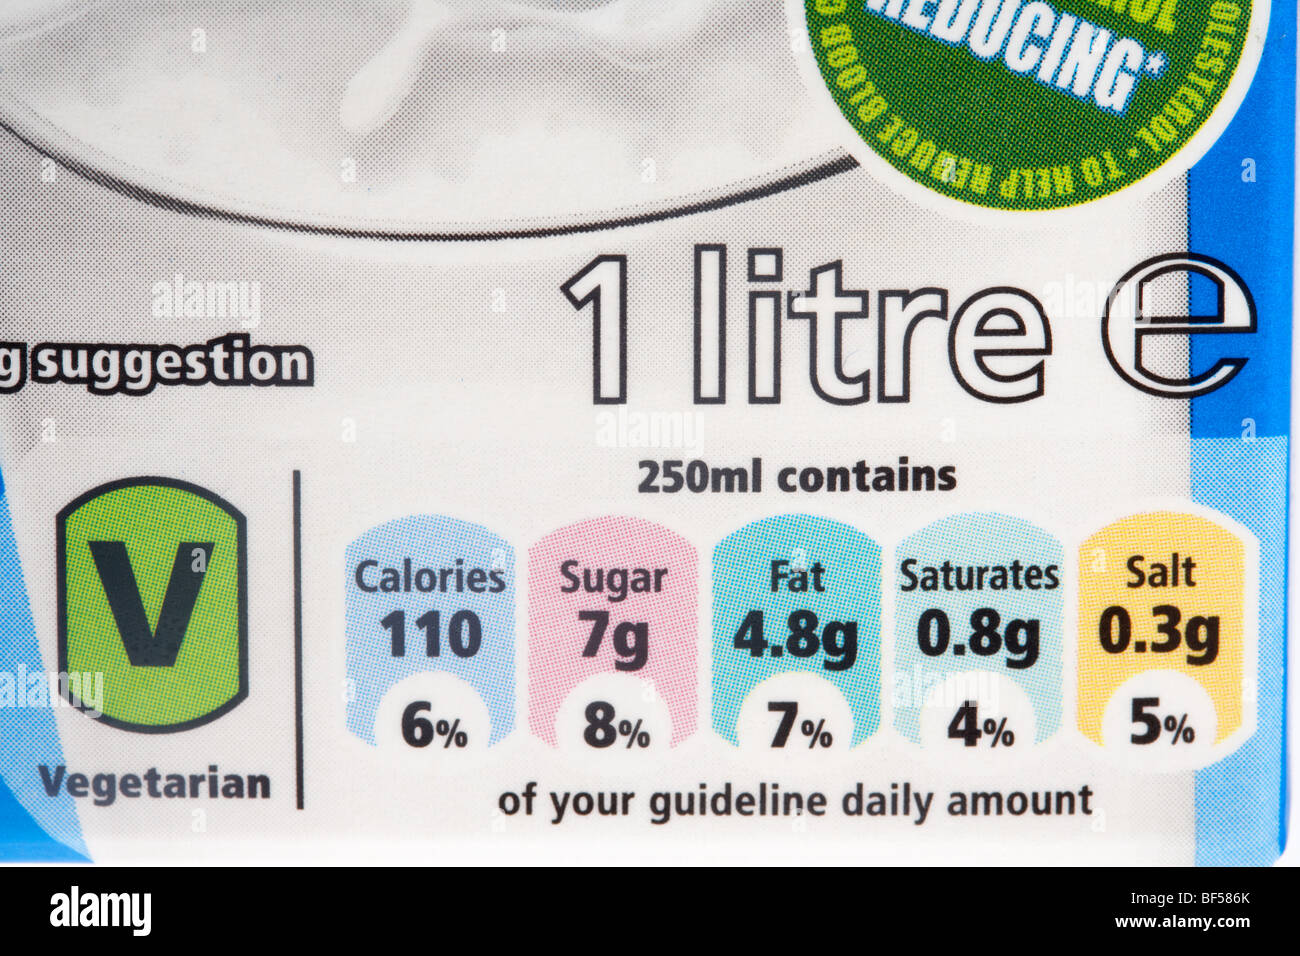 percentage of guideline daily amount food label on a carton of soya milk in the uk Stock Photo